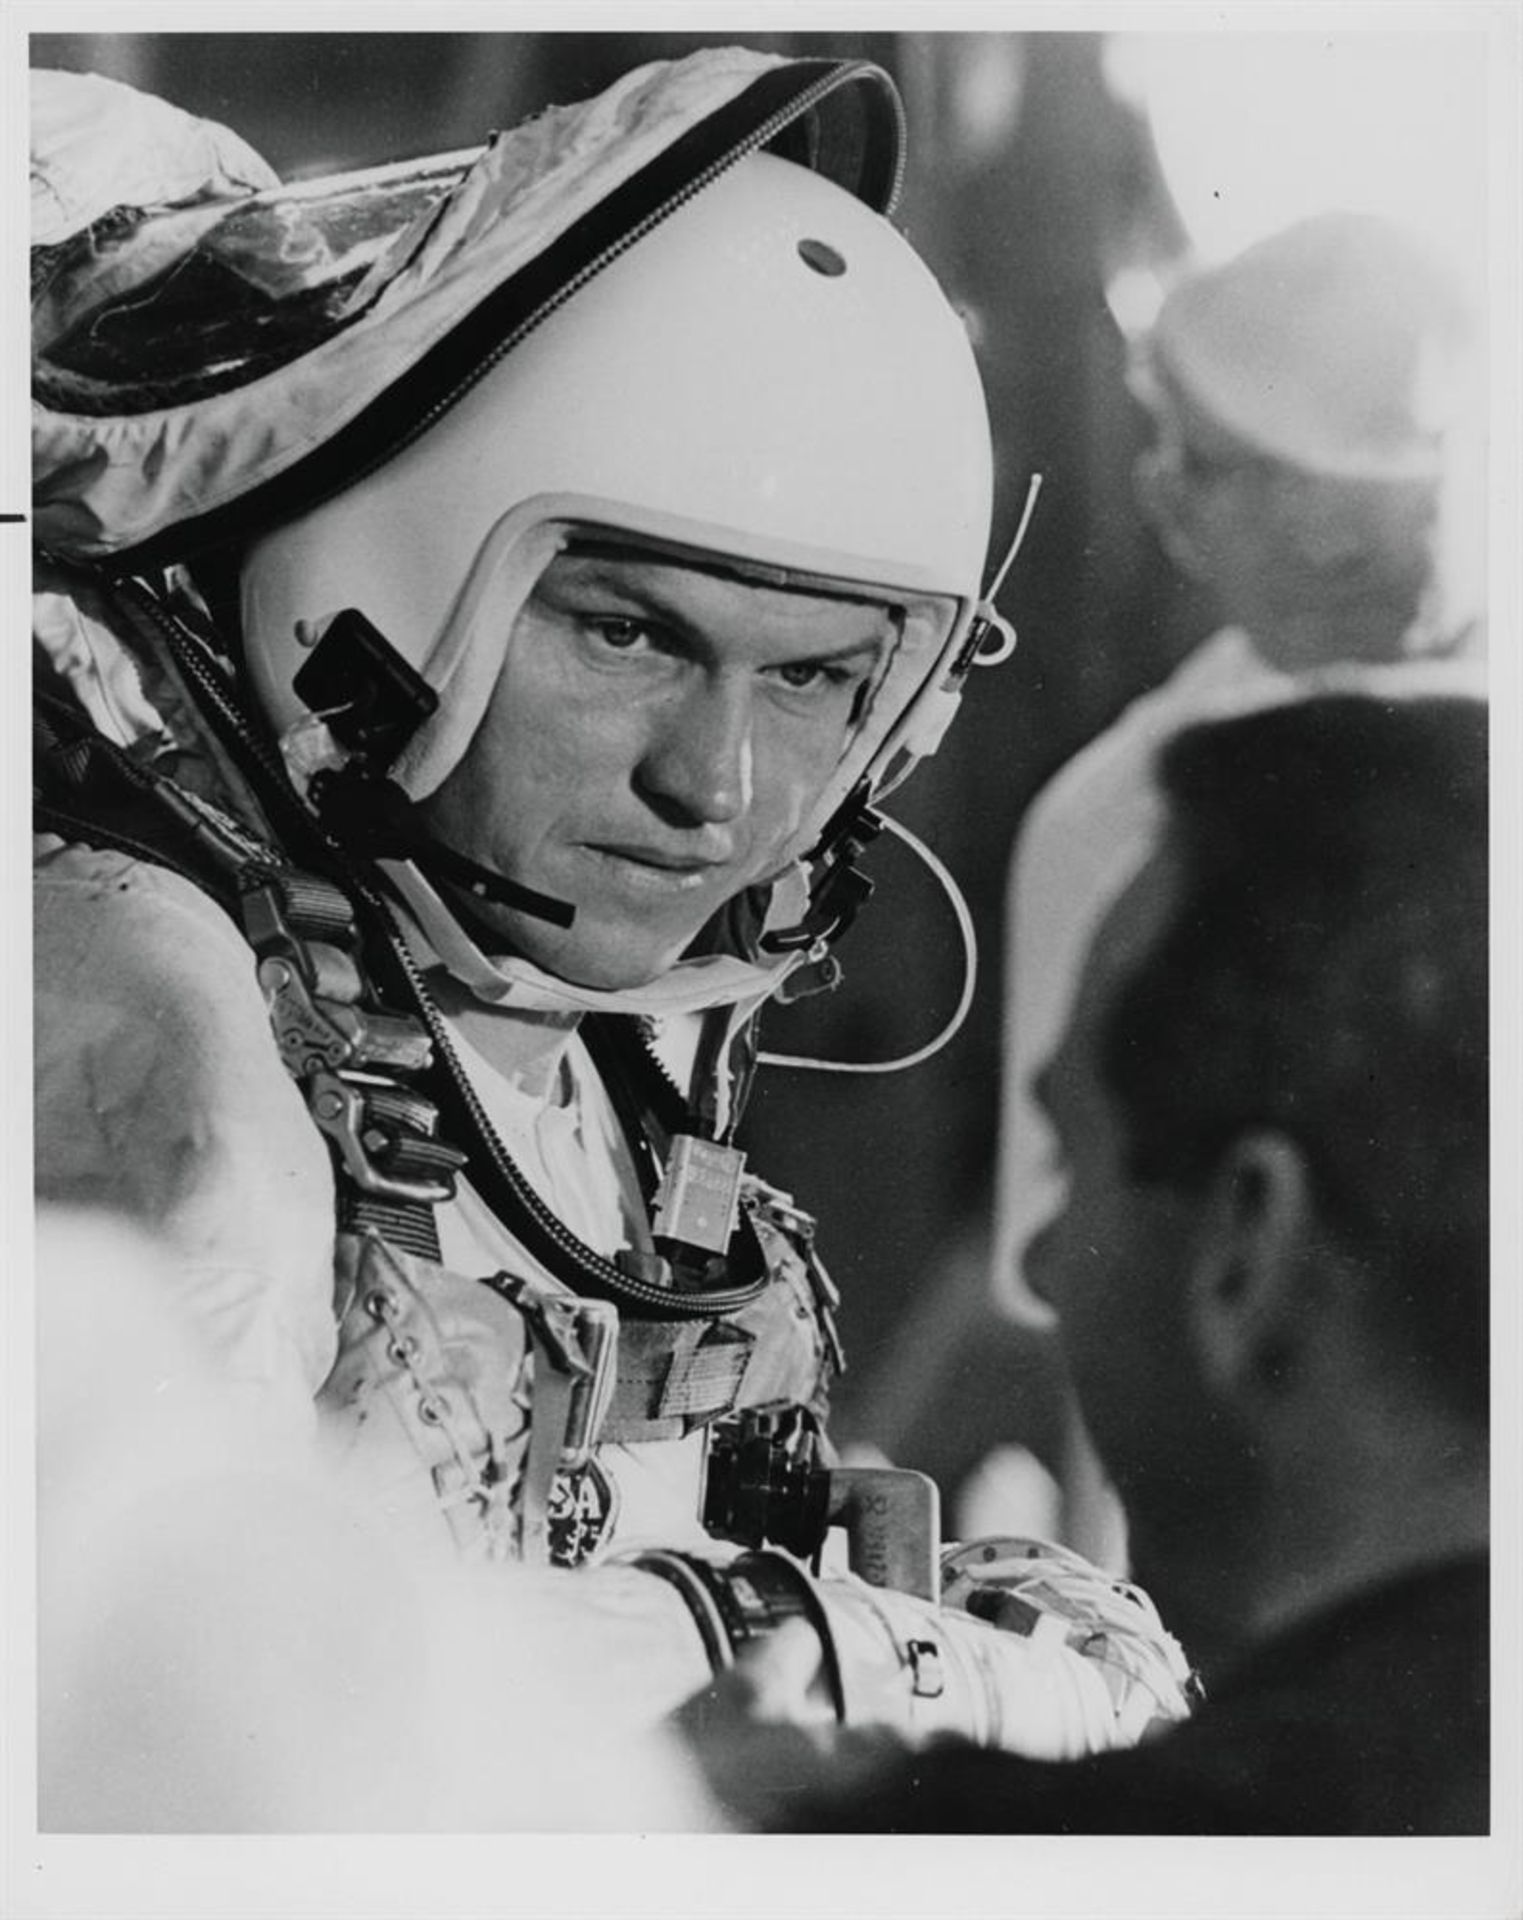 Two views of James Lovell and Frank Borman before the launch of their epic 14-day mission - Image 2 of 5